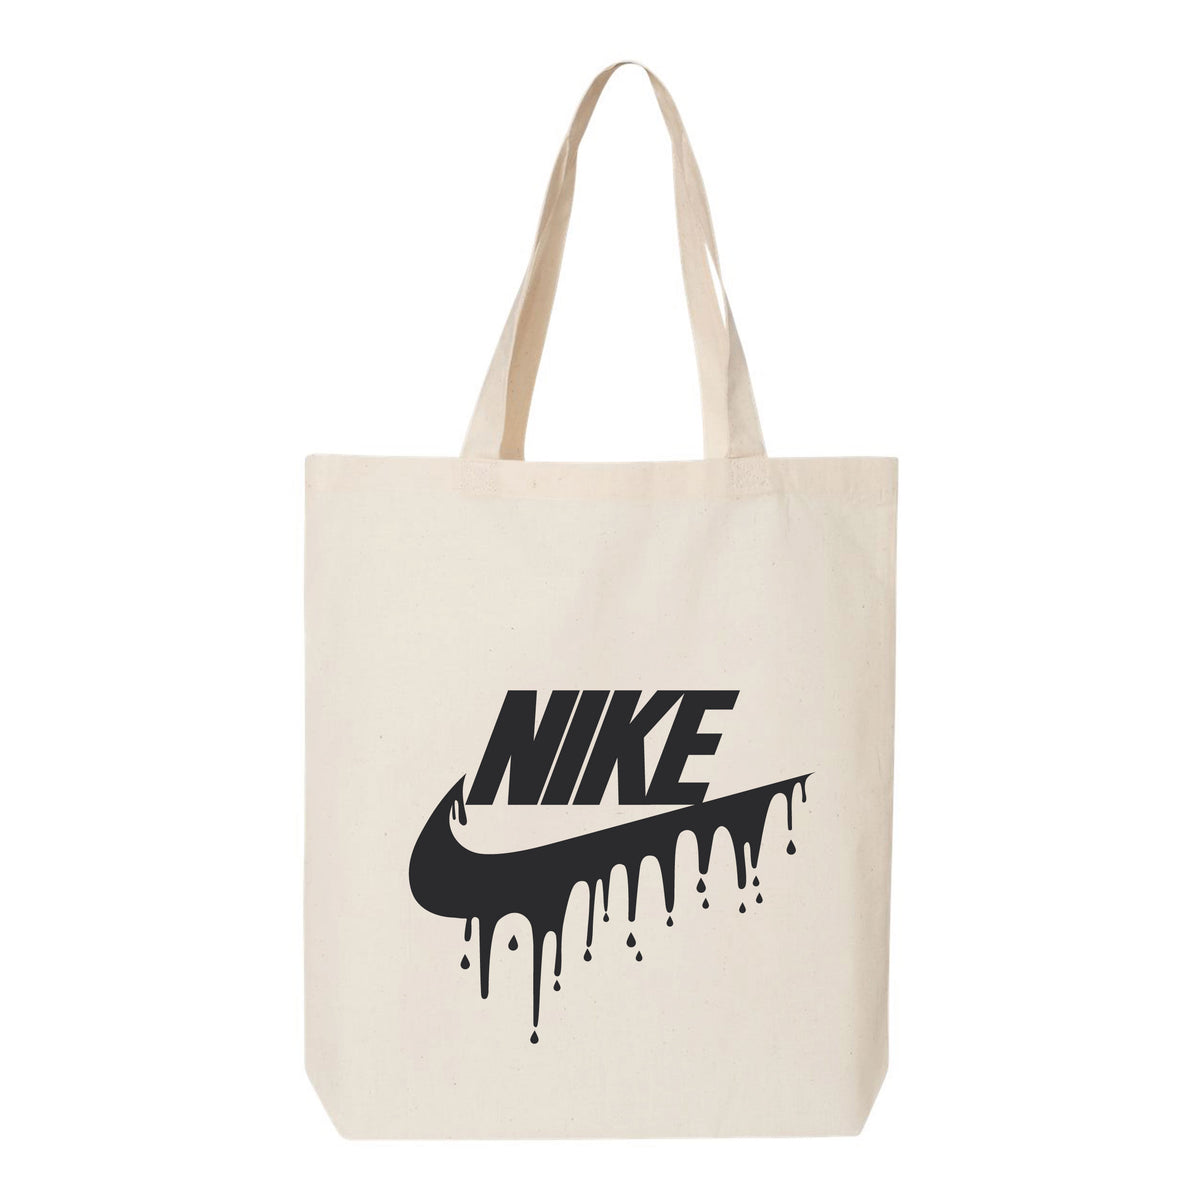 Nike Canvas Tote Bag "Los Angeles Running” NEW